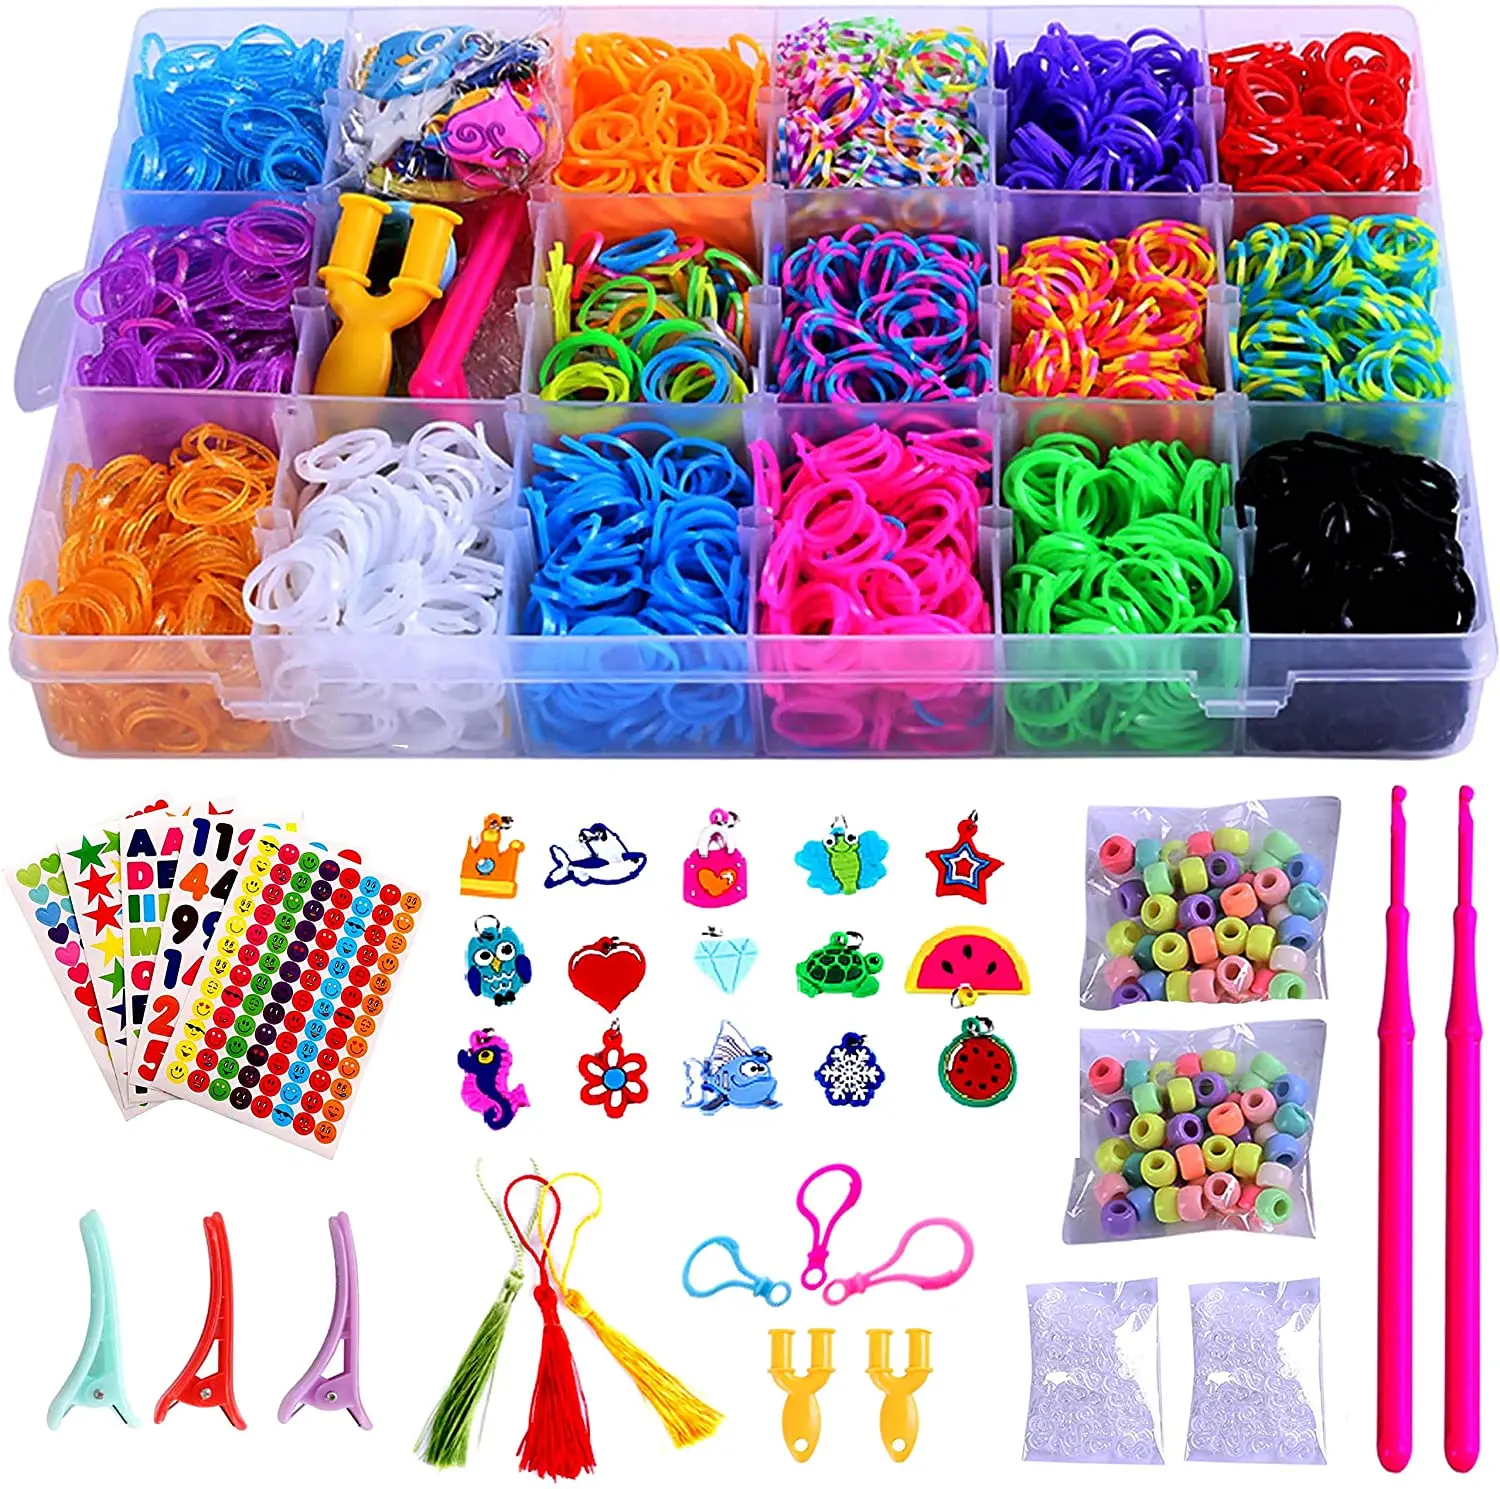 bracelet rubber band kit, bracelet rubber band kit Suppliers and  Manufacturers at Alibaba.com